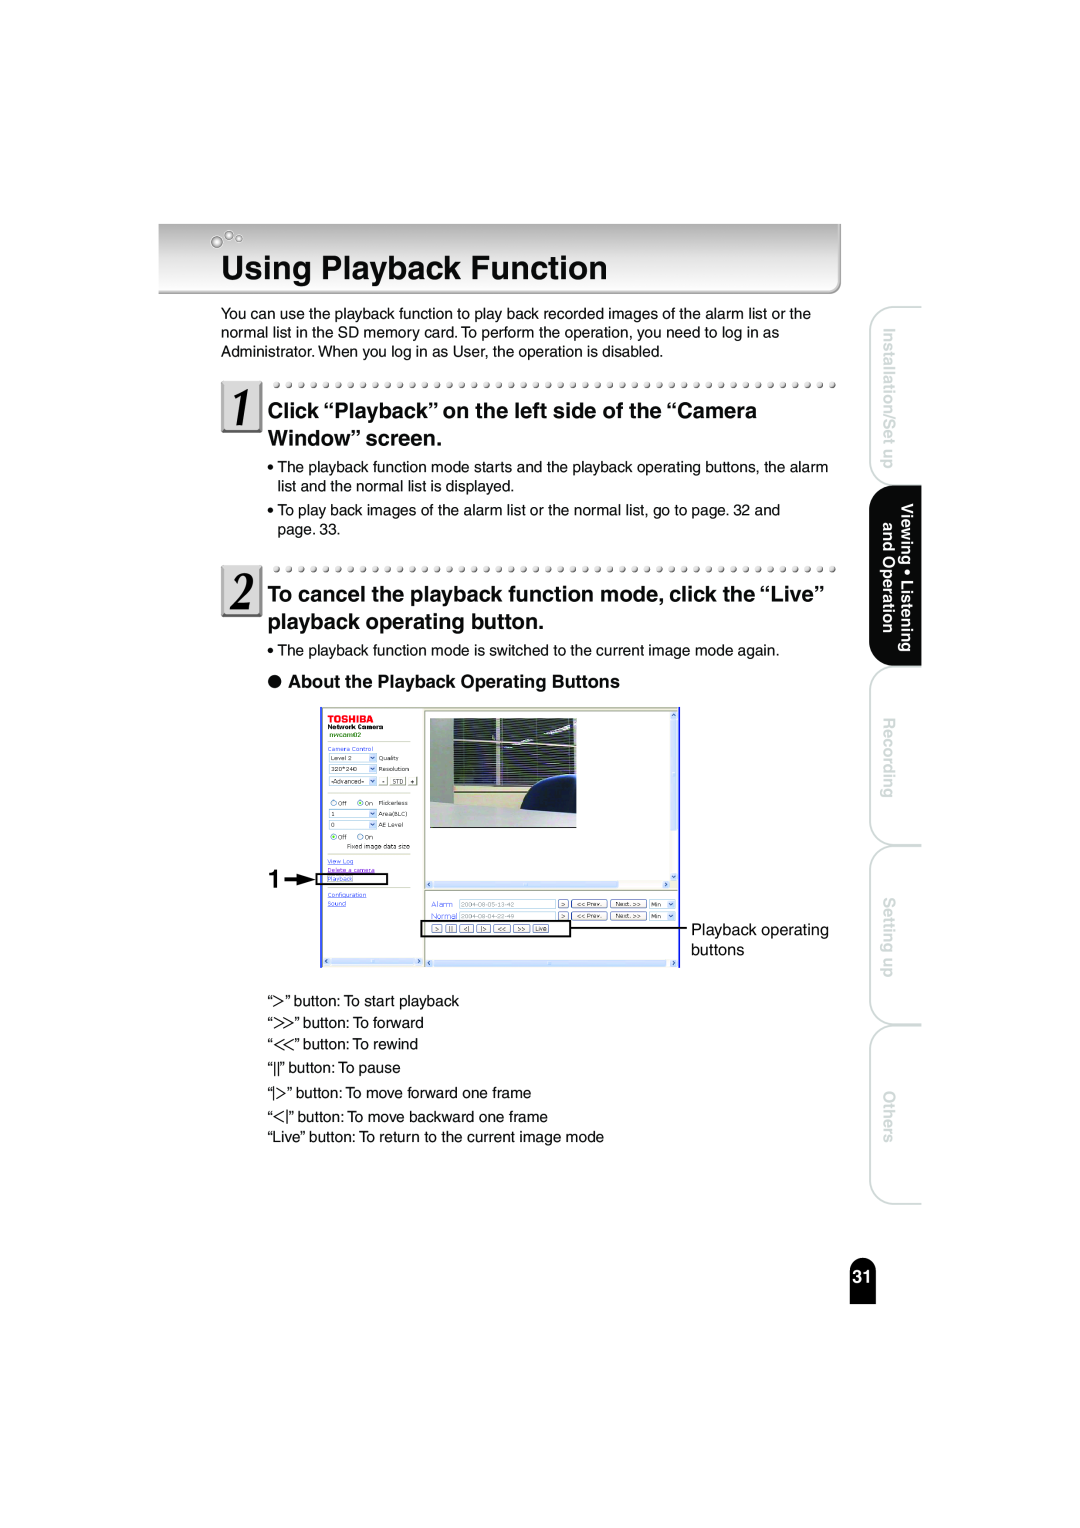 Toshiba IK-WB02A manual Using Playback Function, About the Playback Operating Buttons 